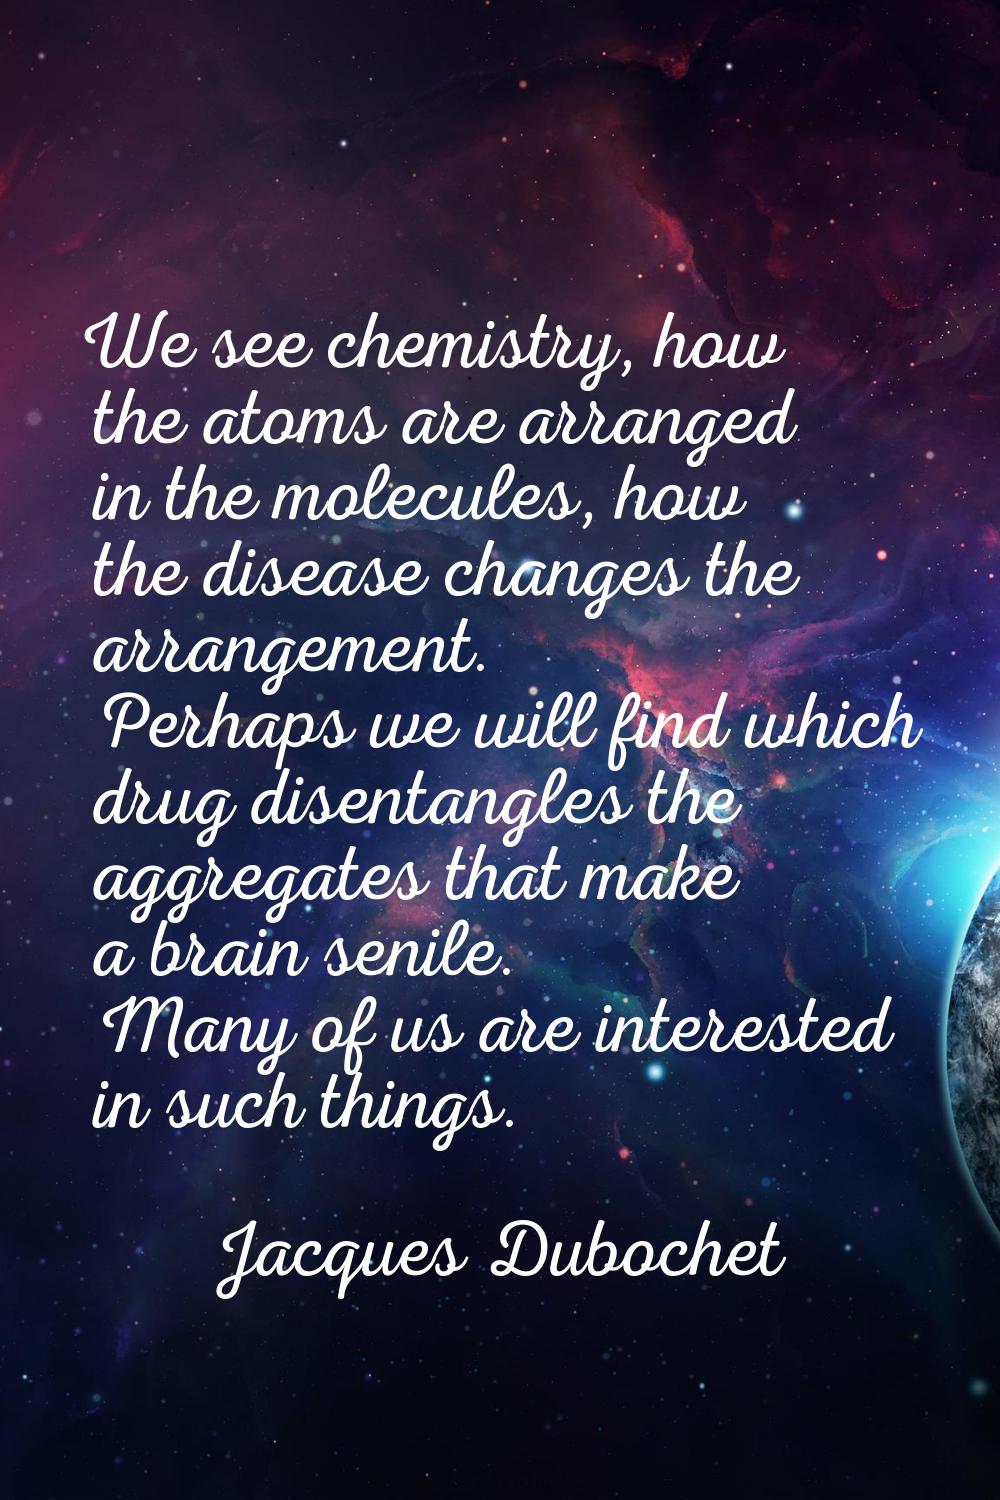 We see chemistry, how the atoms are arranged in the molecules, how the disease changes the arrangem